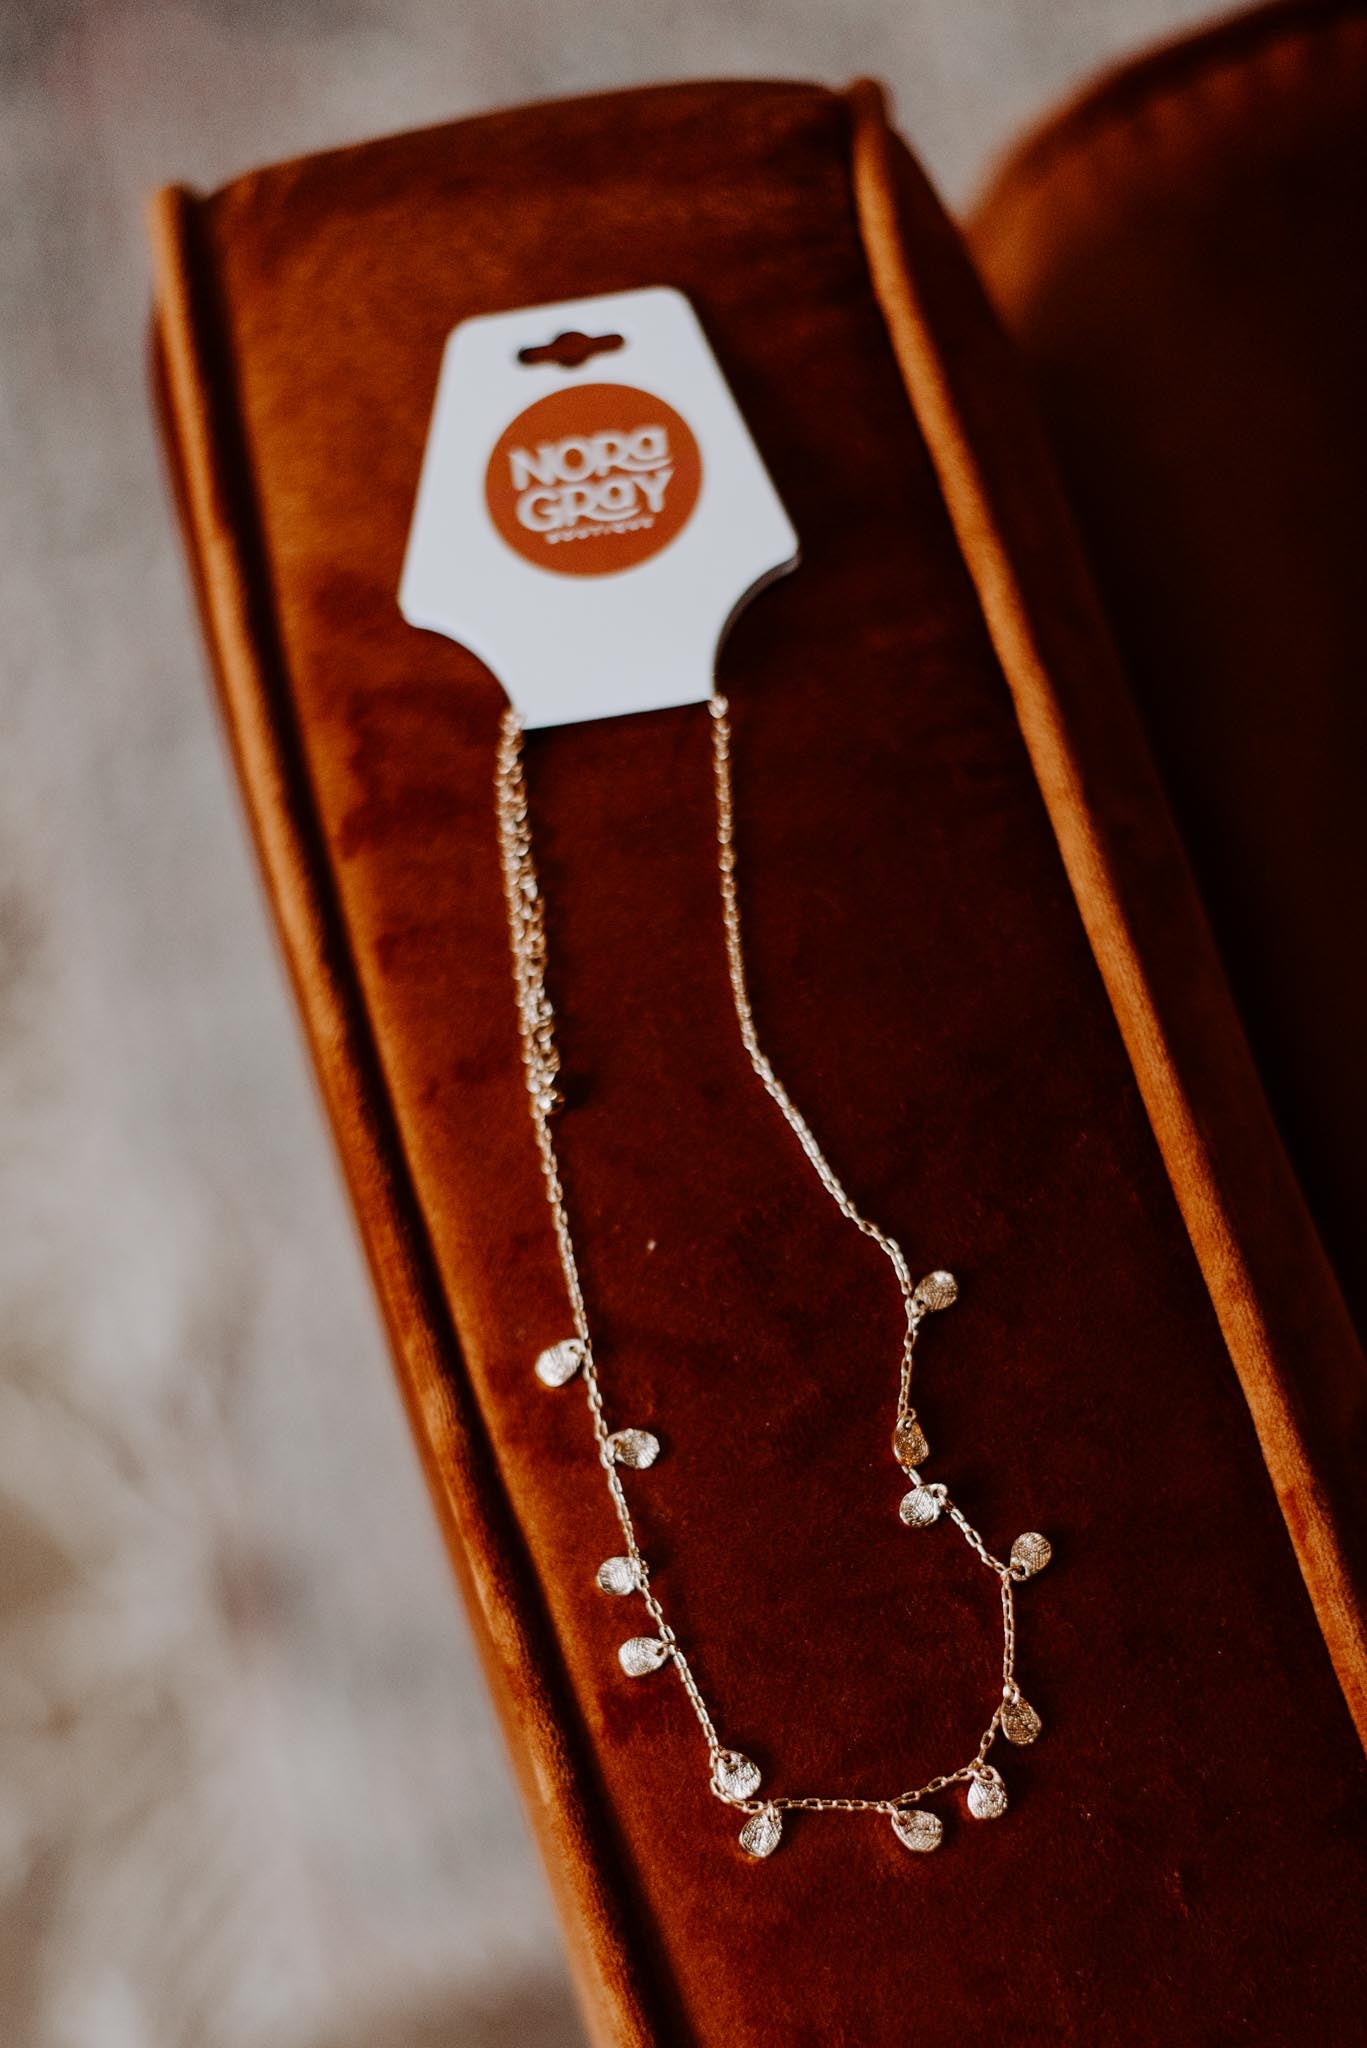 Scratched Teardrop Charm Necklace